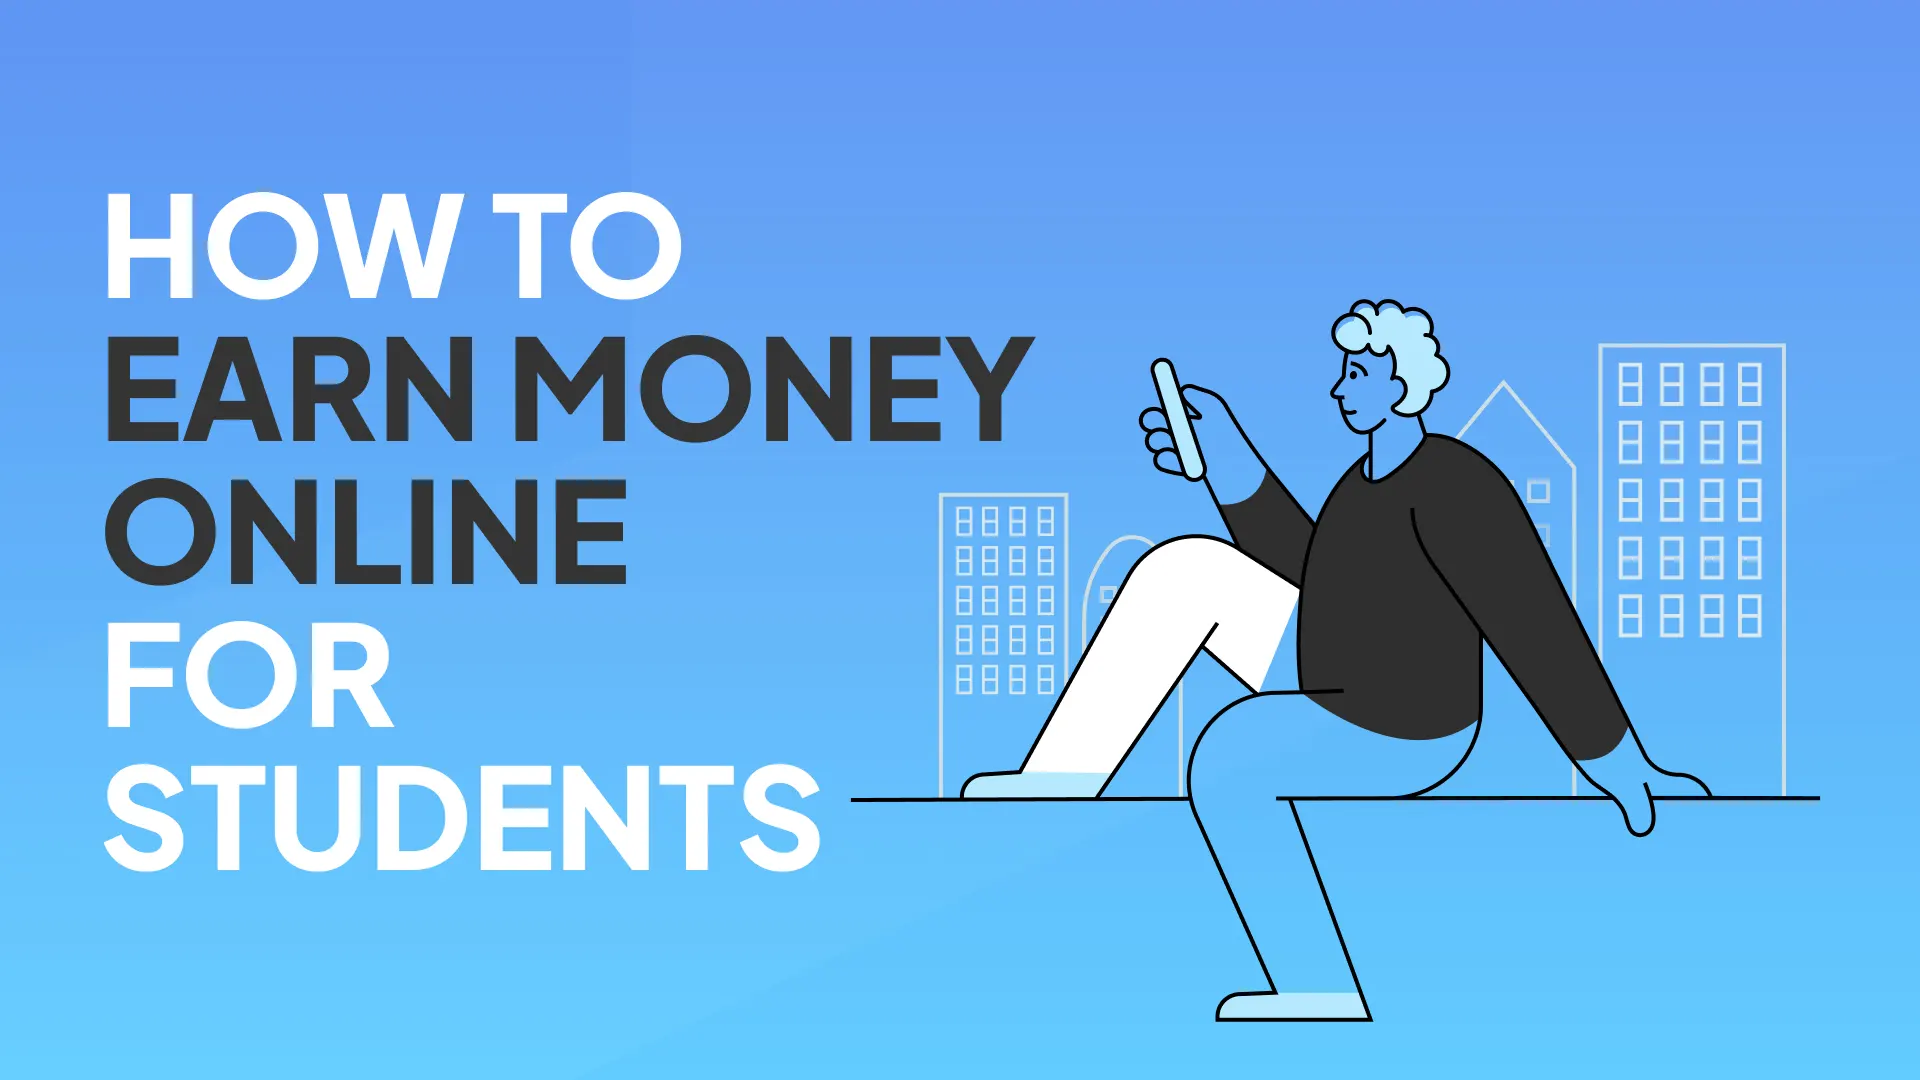 BLOG-FEATUREDIMAGE/how-to-earn-money-online--without-investment-for-students.webp